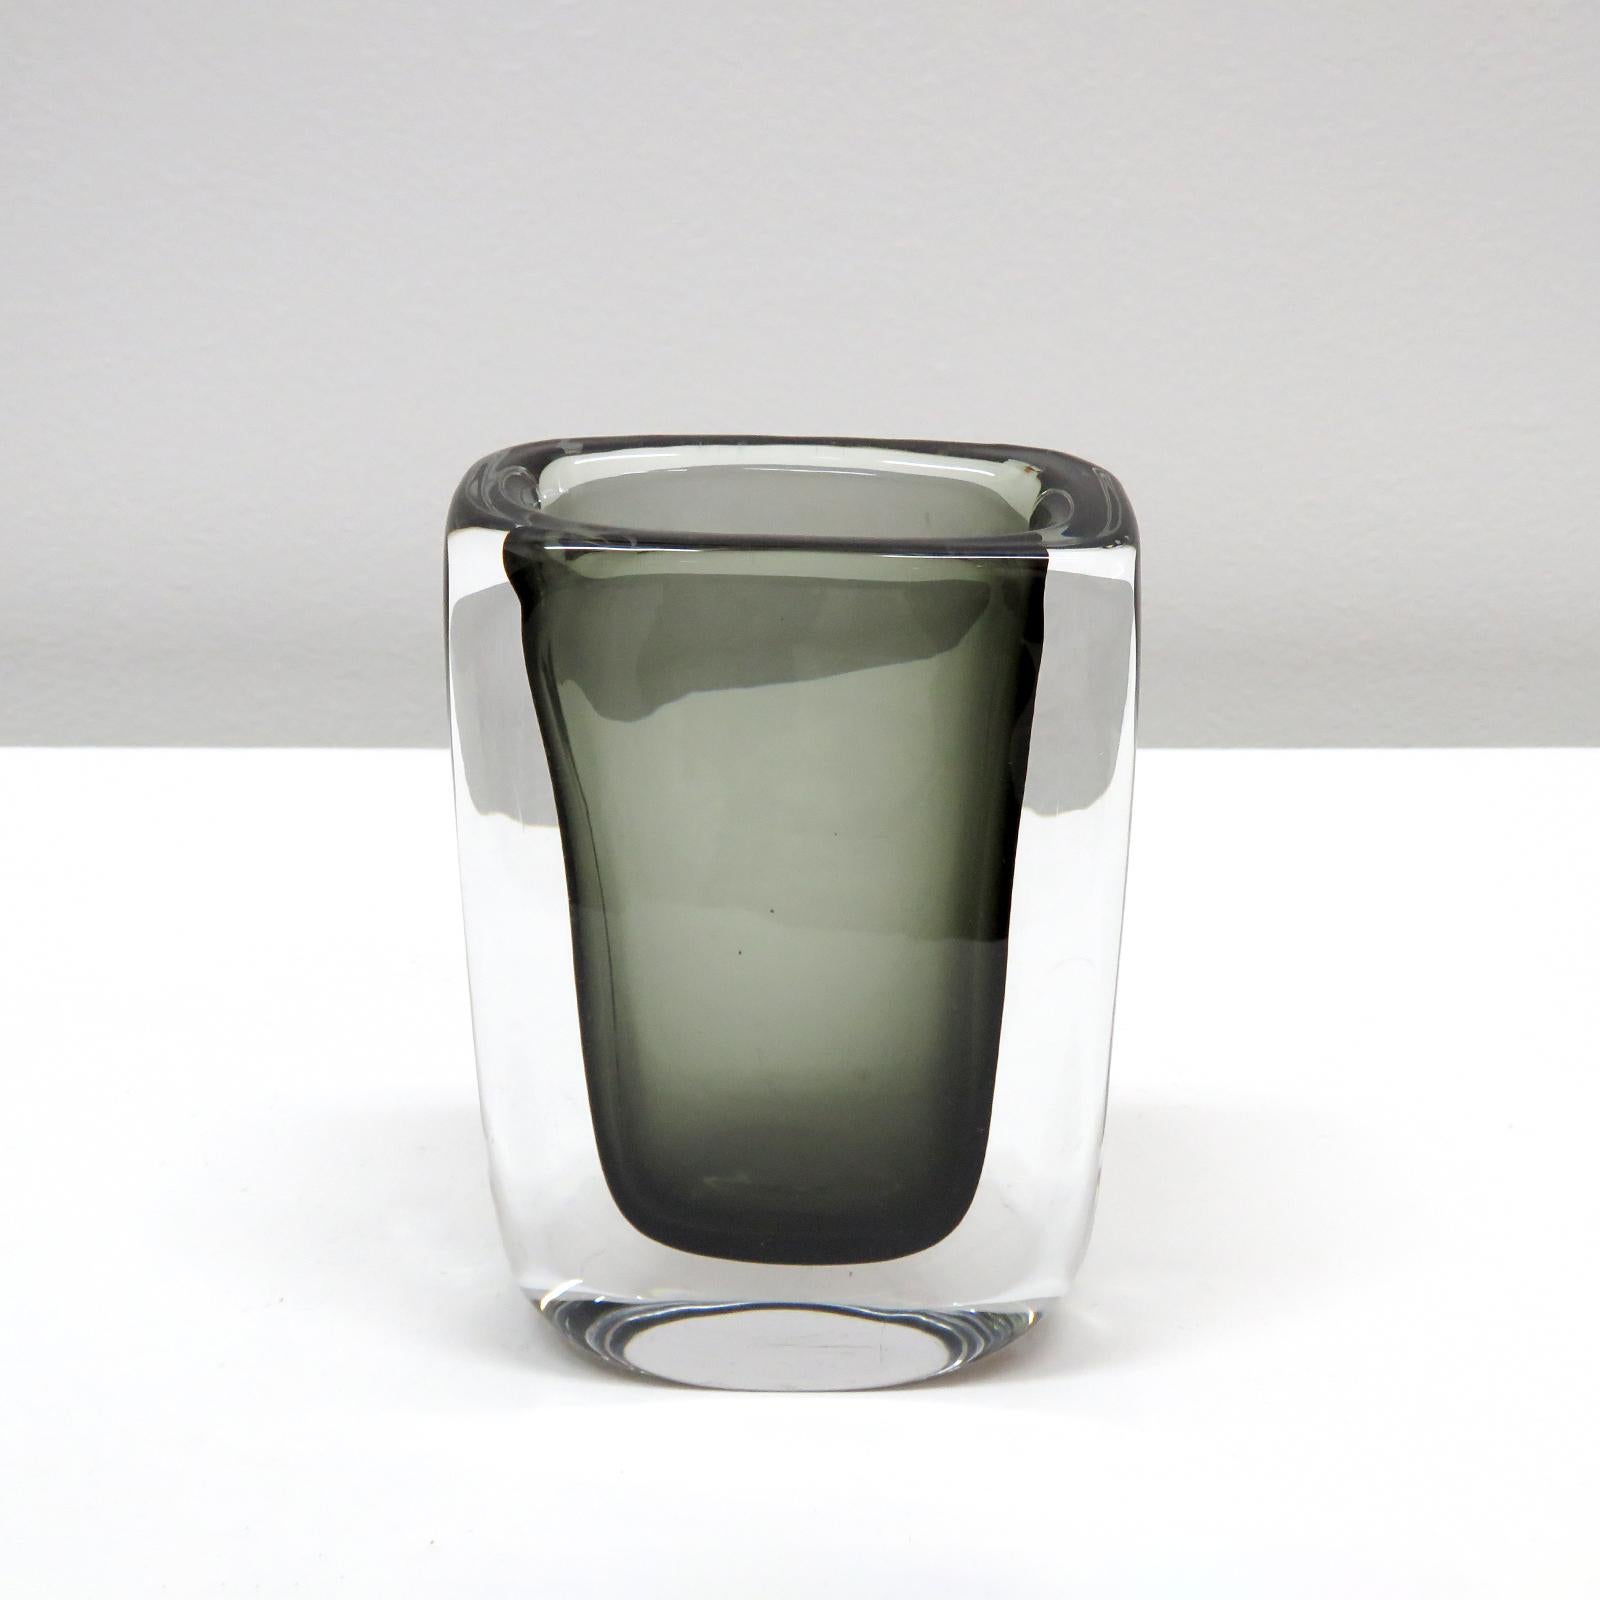 Stunning handblown, art glass 'Sommerso' vase designed by Nils Landberg and produced by Orrefors, Sweden, 1960s in grey-green hues.